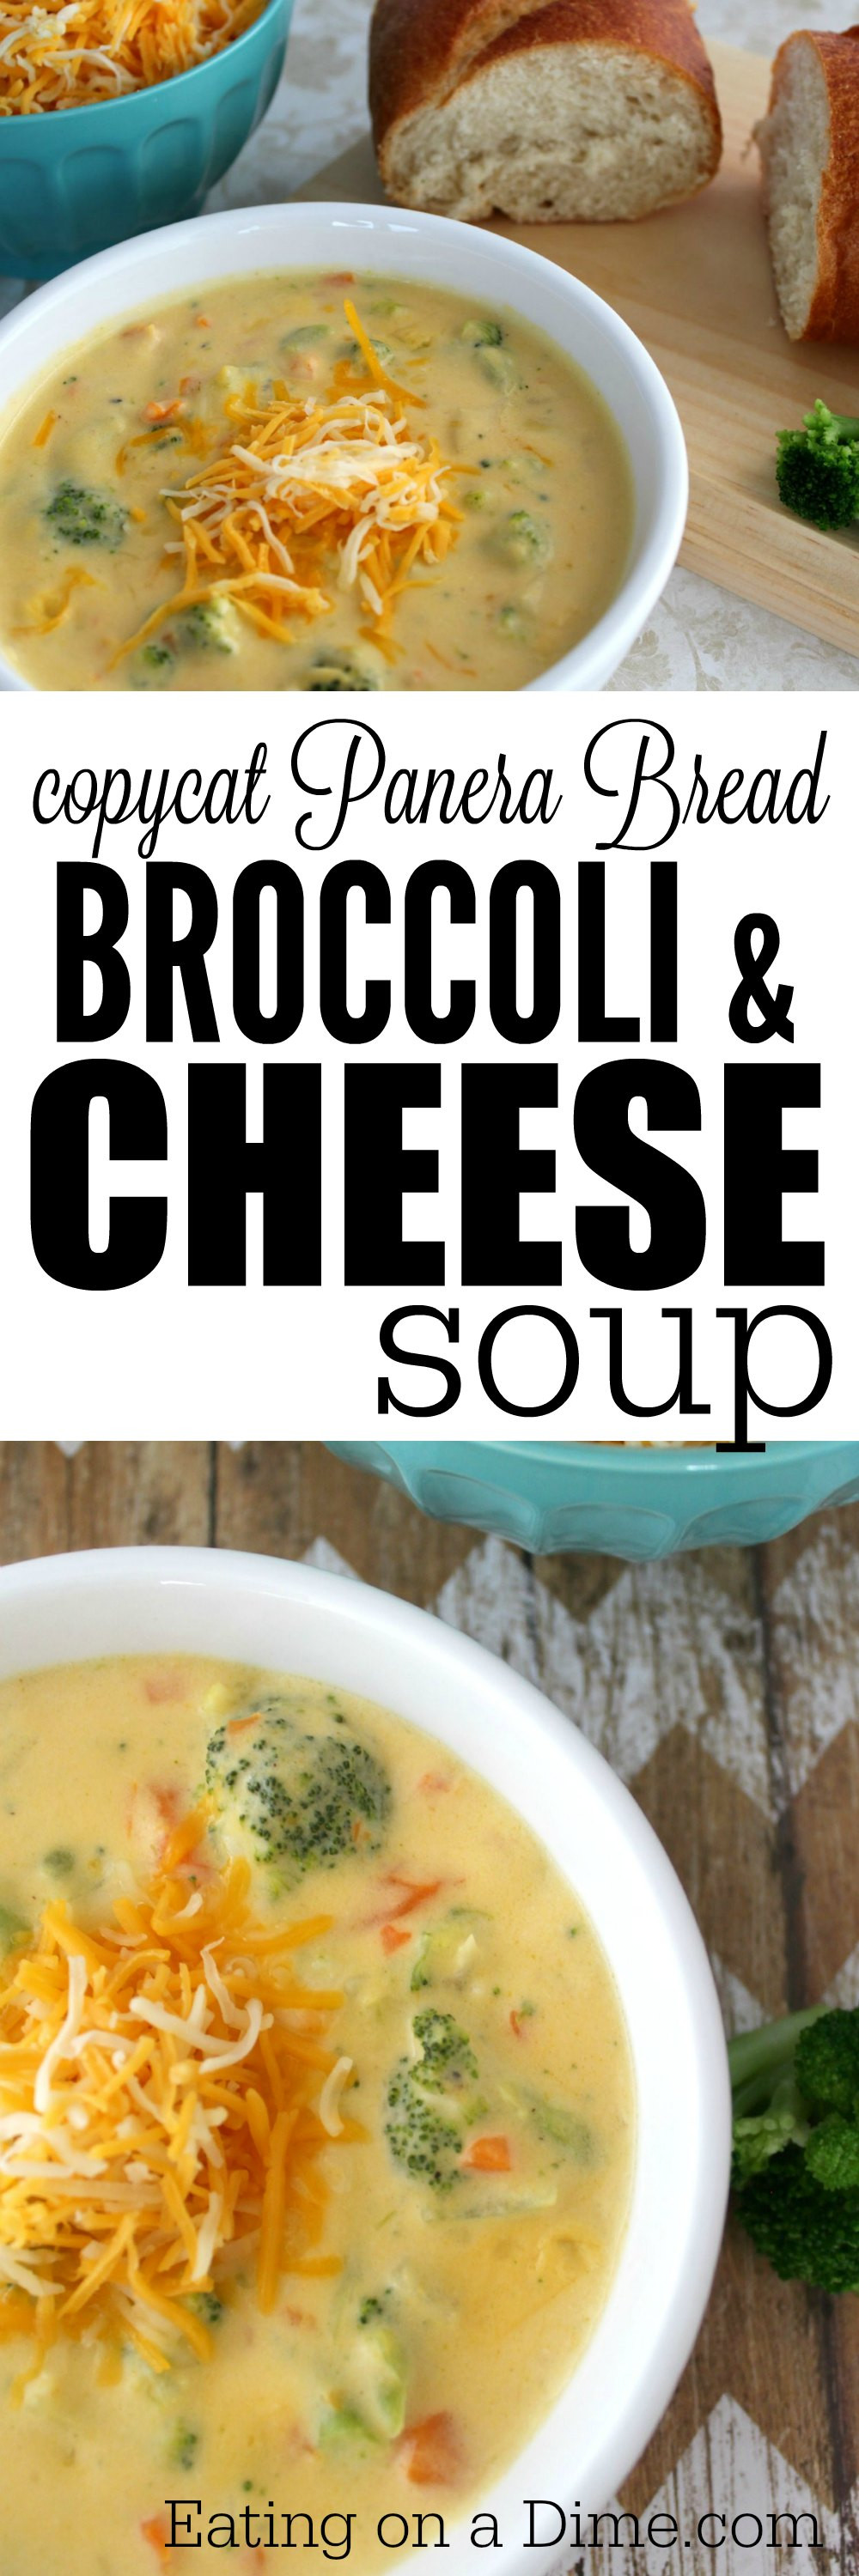 Panera Chicken Noodle Soup Recipes
 CopyCat Panera recipe Broccoli and Cheese Soup Eating on